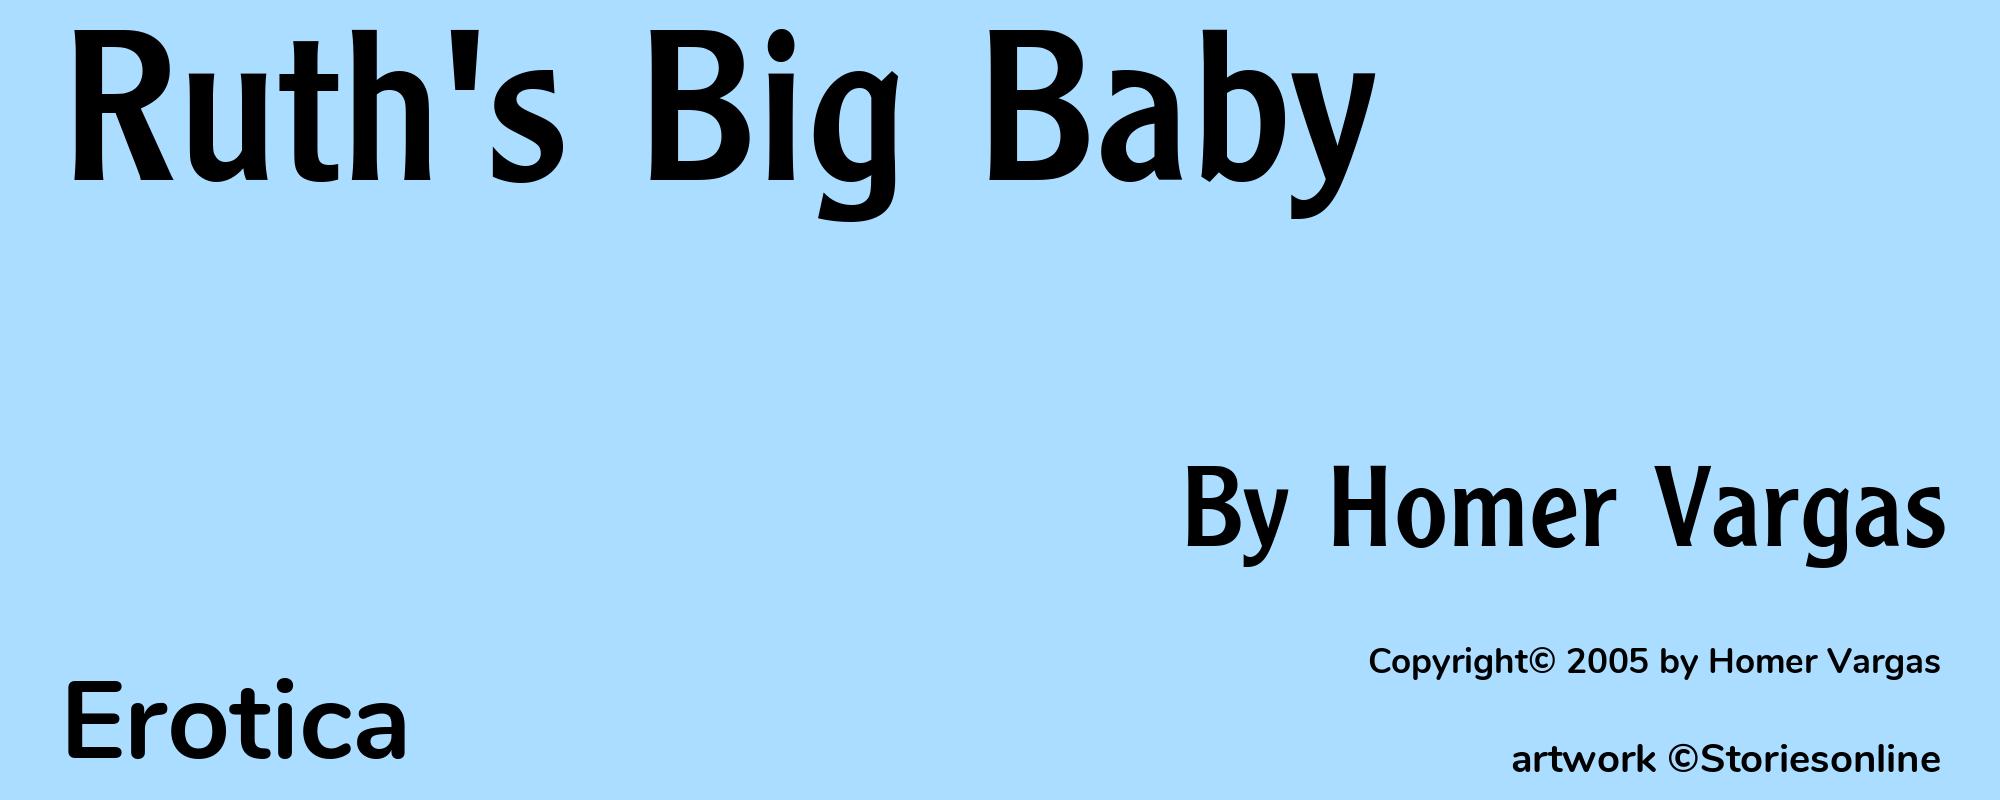 Ruth's Big Baby - Cover